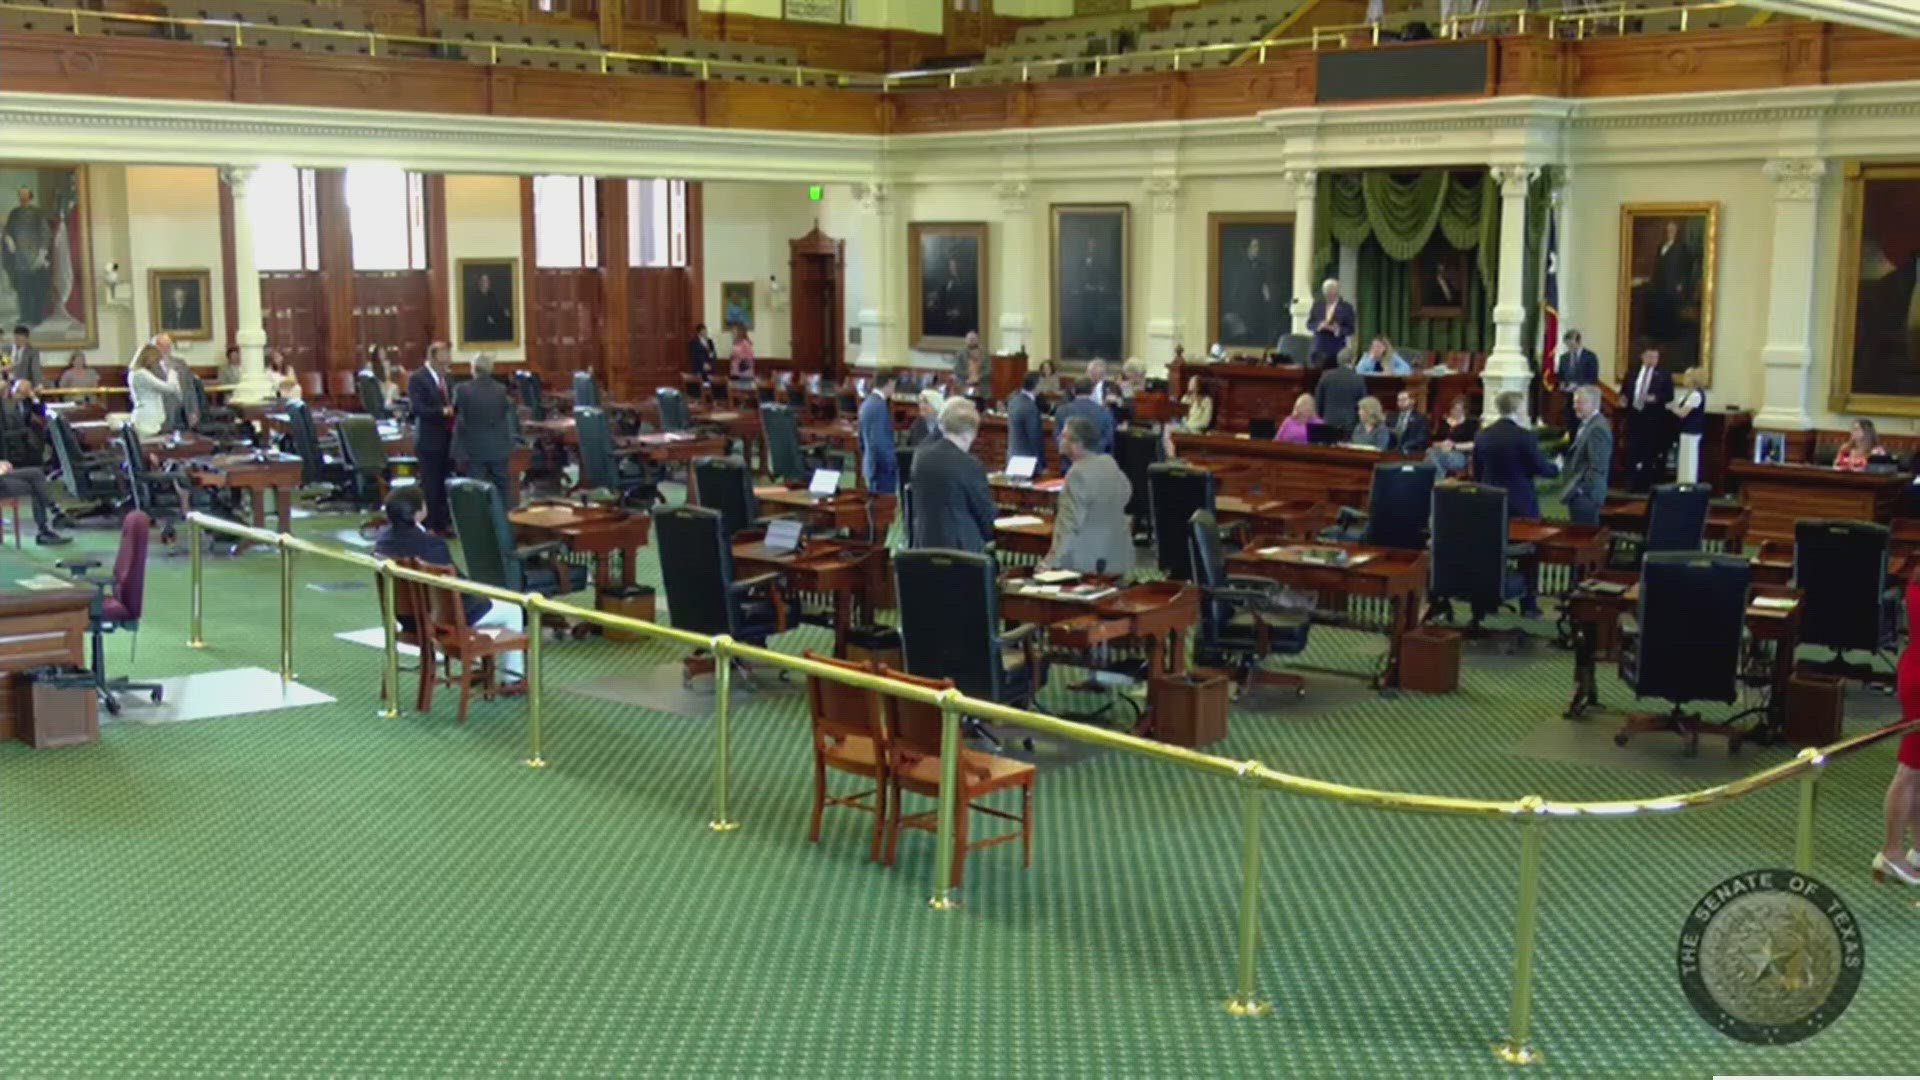 A stalemate among Texas’ top Republicans has dragged on for months. Tax-cut proponents in the House and Senate made their first pitches to end the impasse Wednesday.